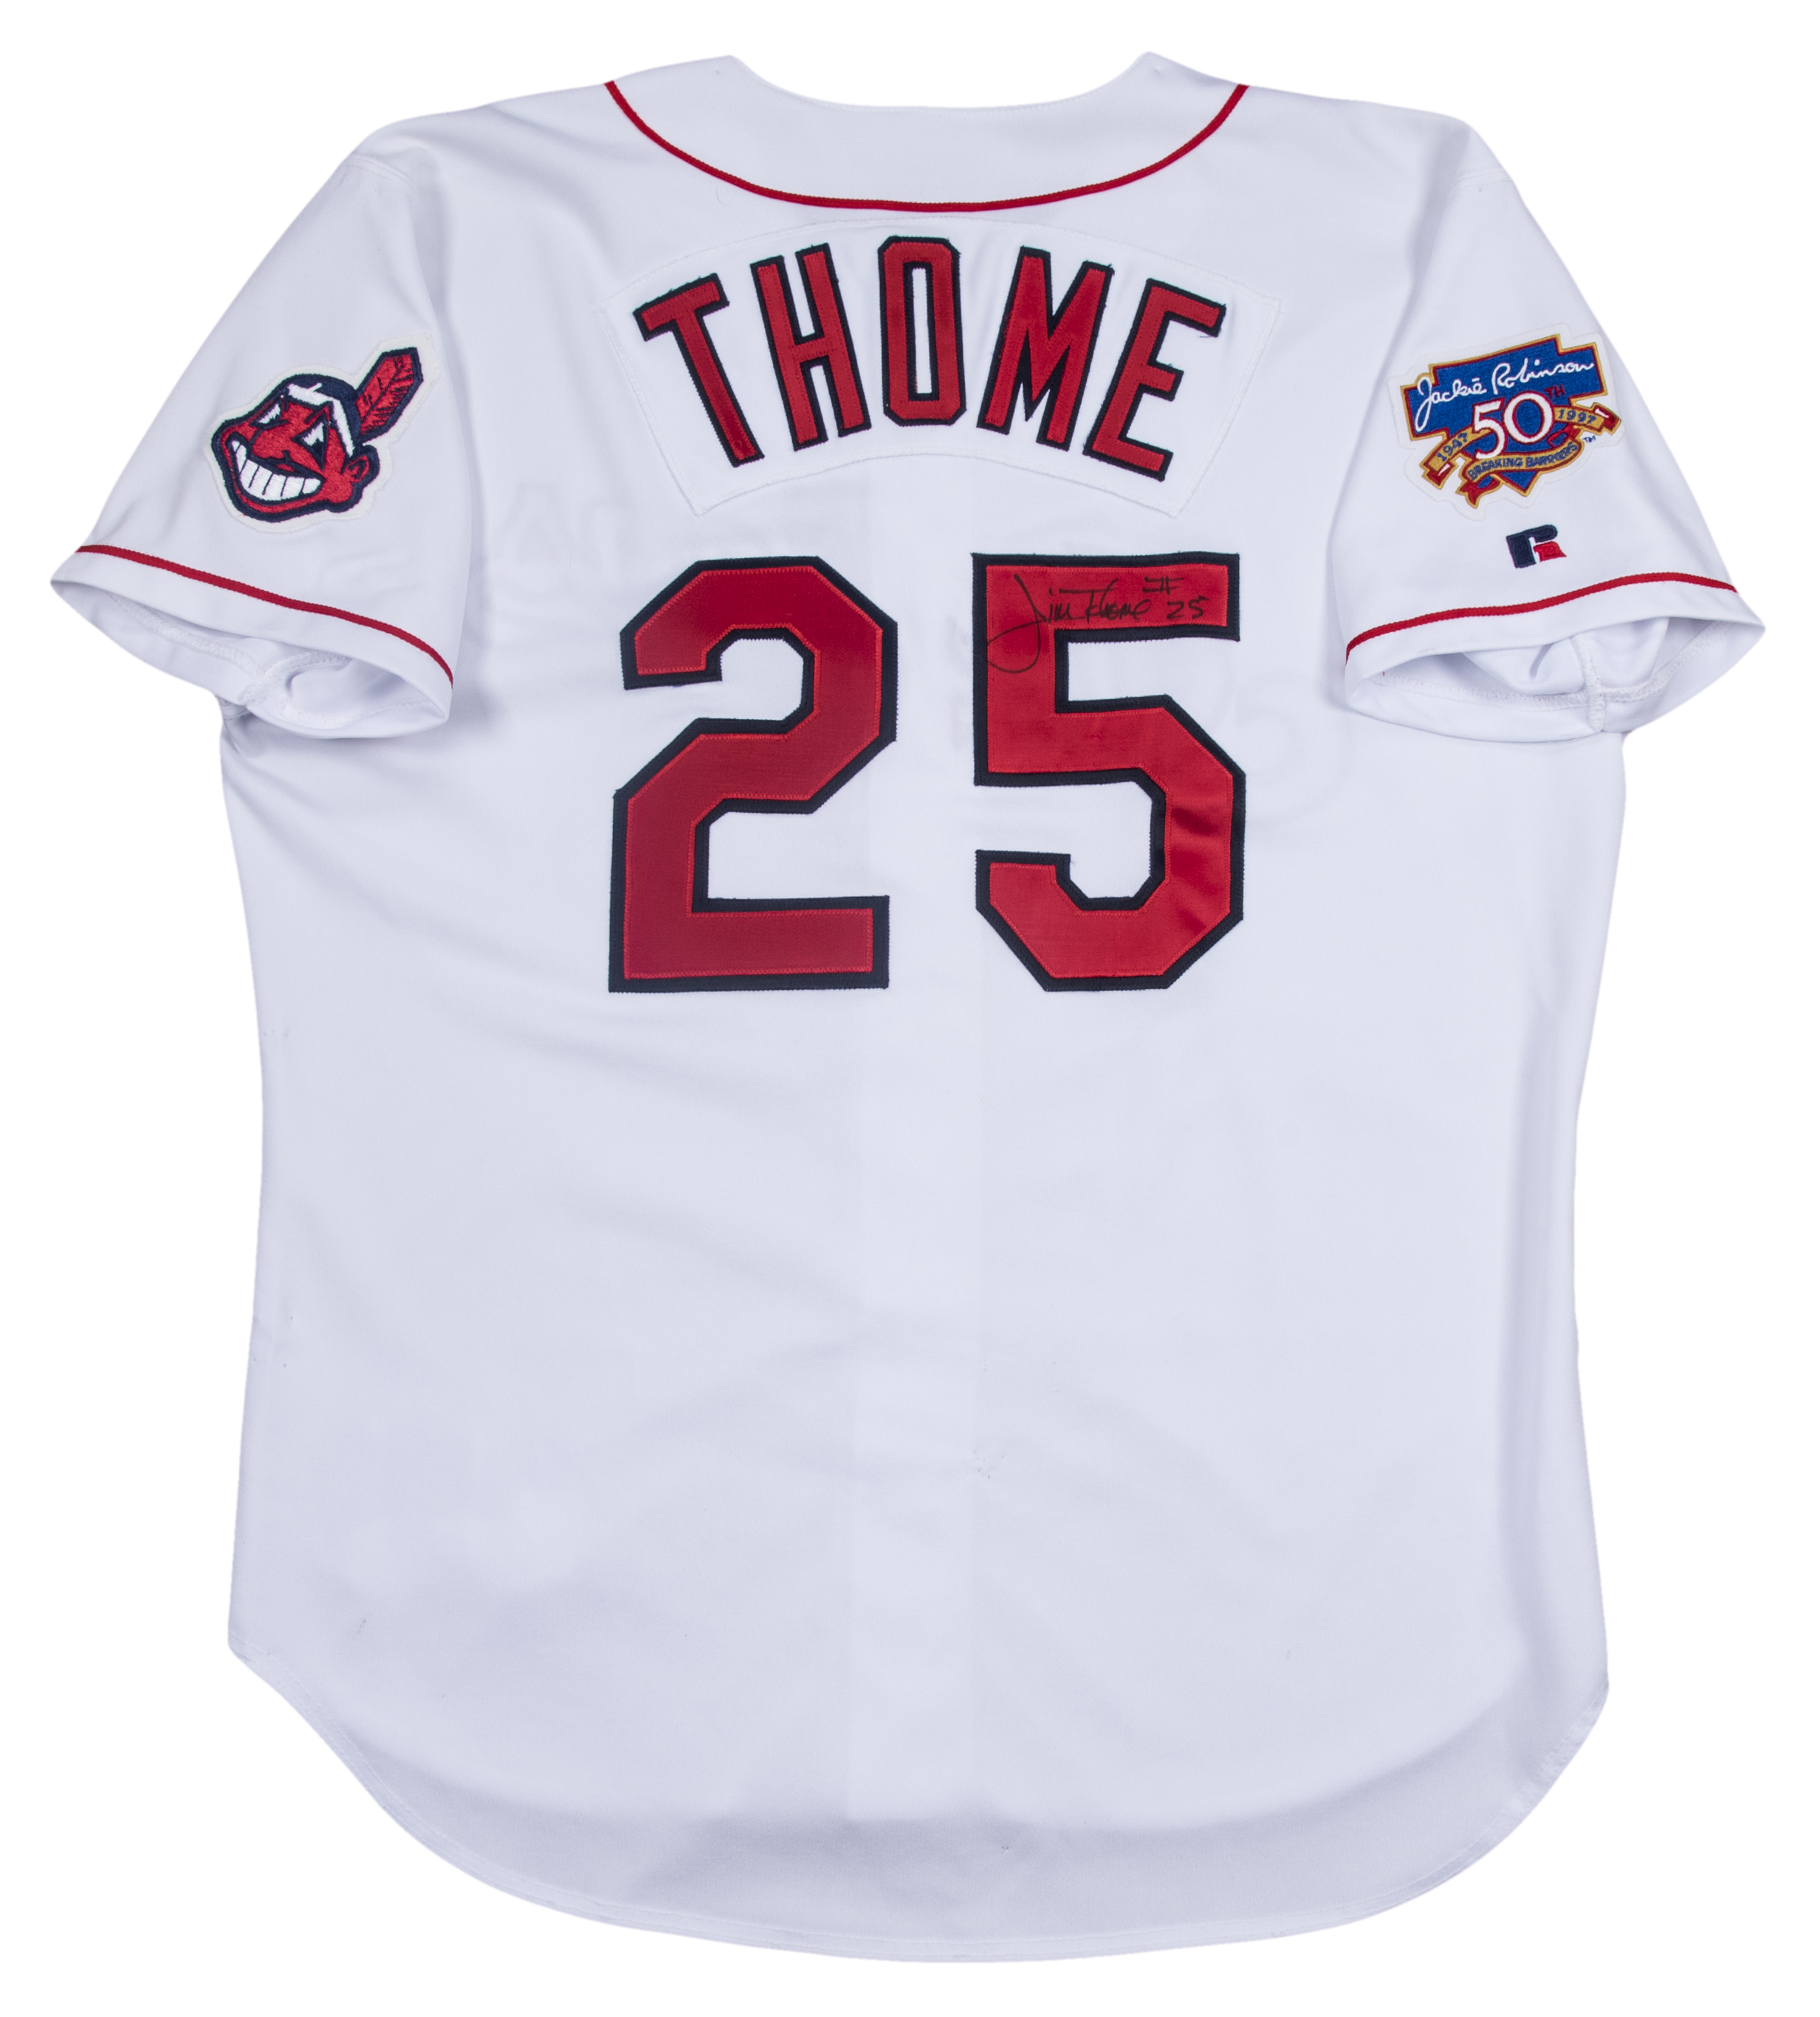 cleveland indians jersey numbers